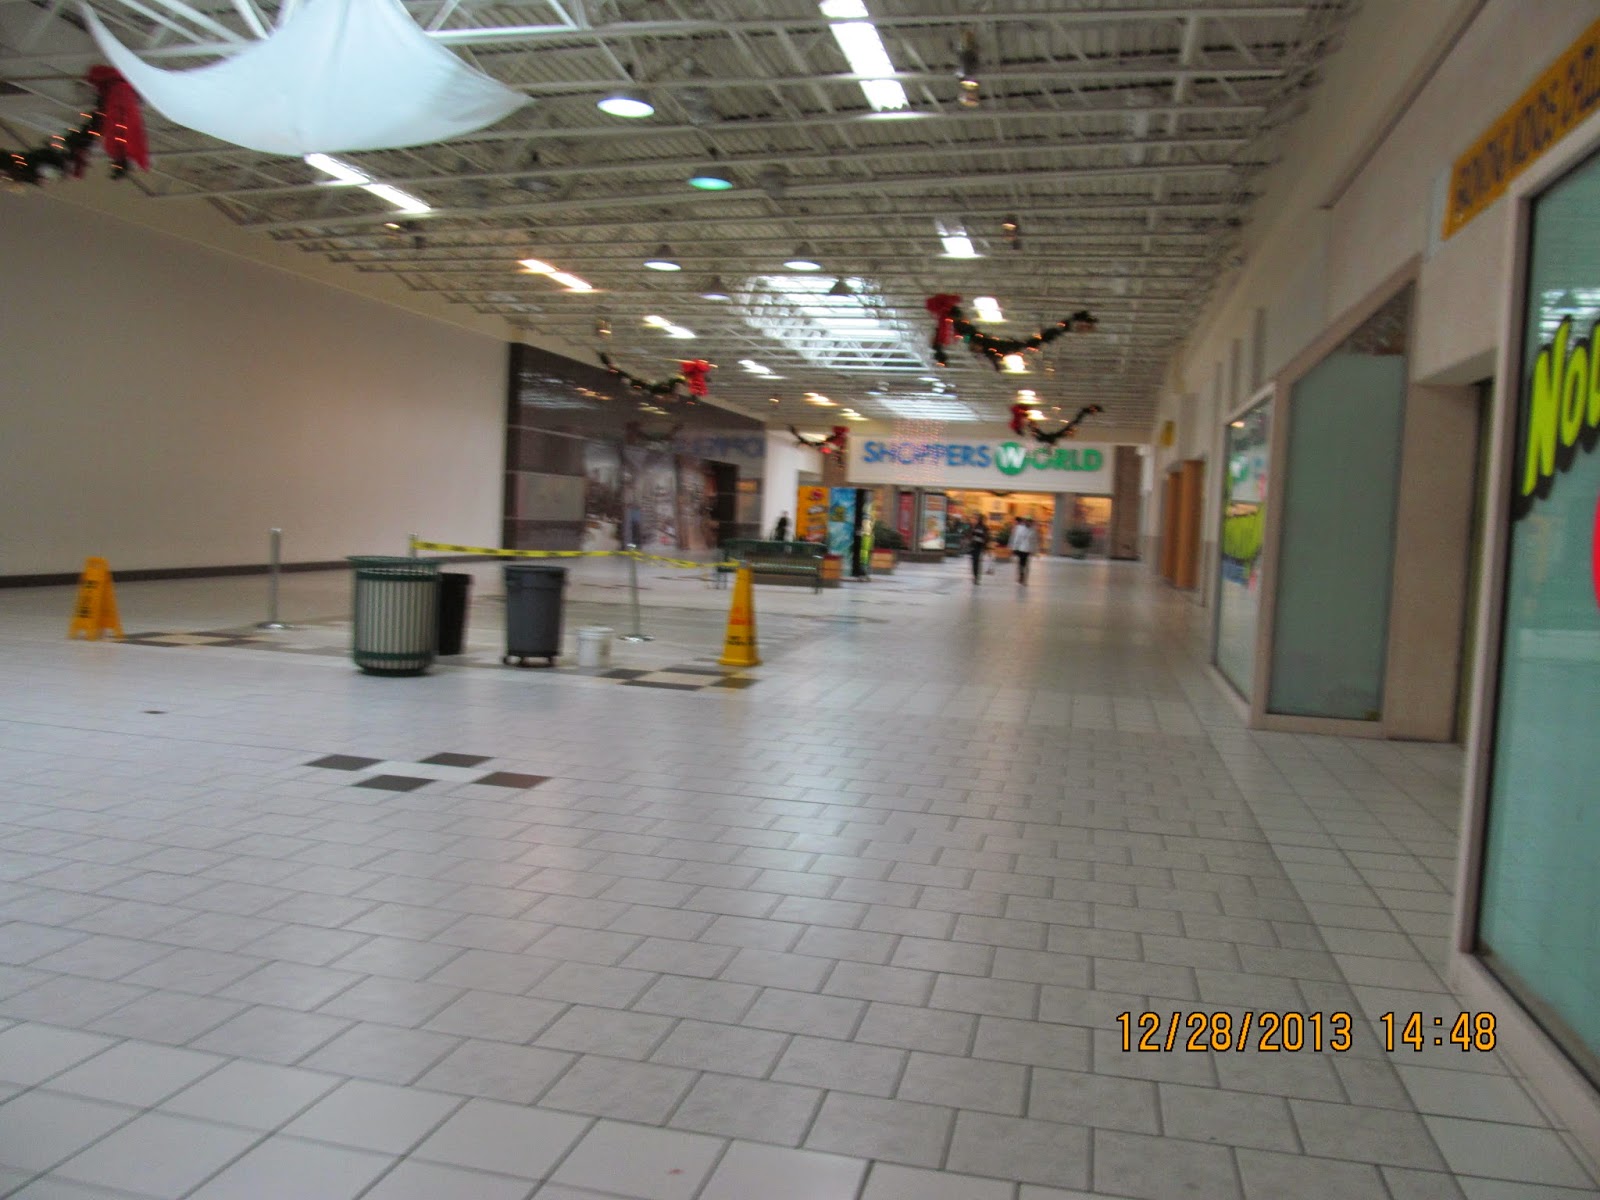 Trip to the Mall: Lafayette Square Mall- (Indianapolis, IN)